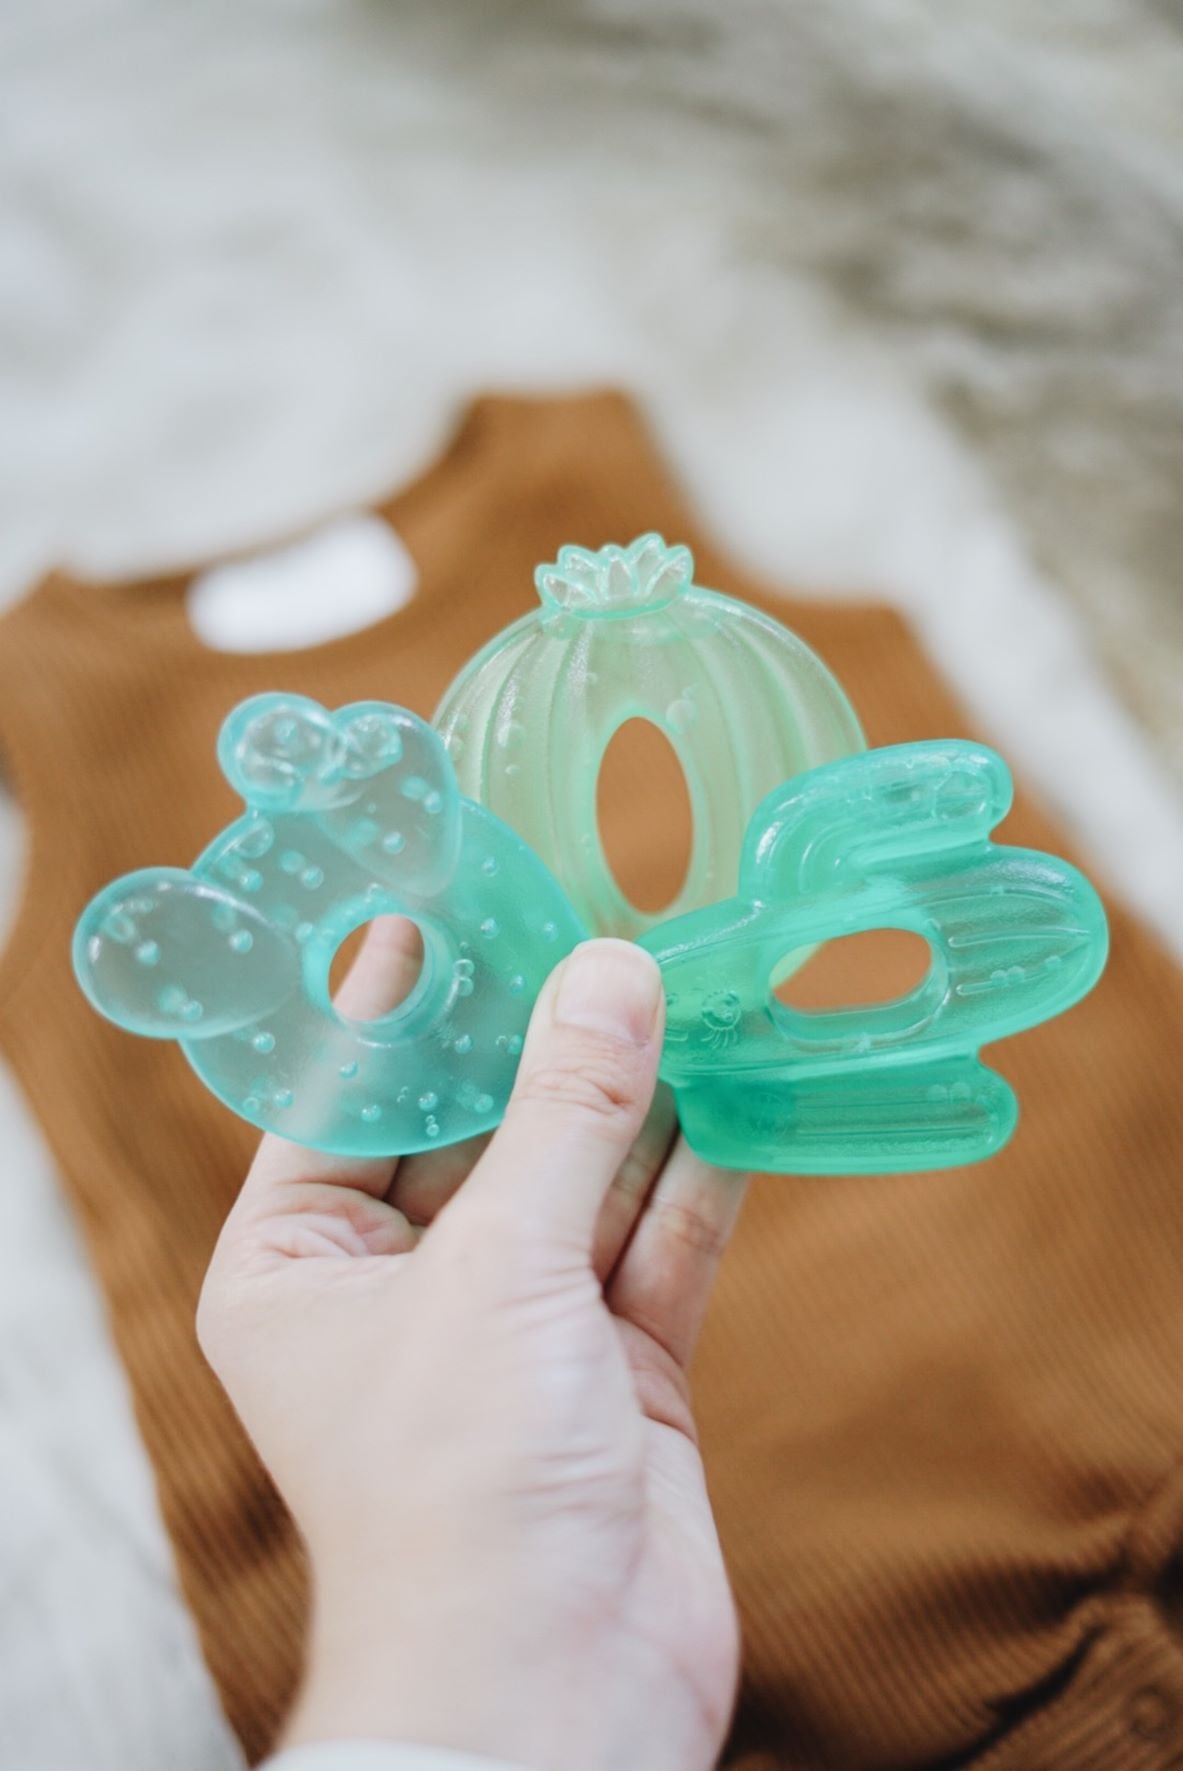 Infant Baby Itzy Ritzy 3pk Cutie Coolers Cactus Water Filled Teethers. Jedbaby